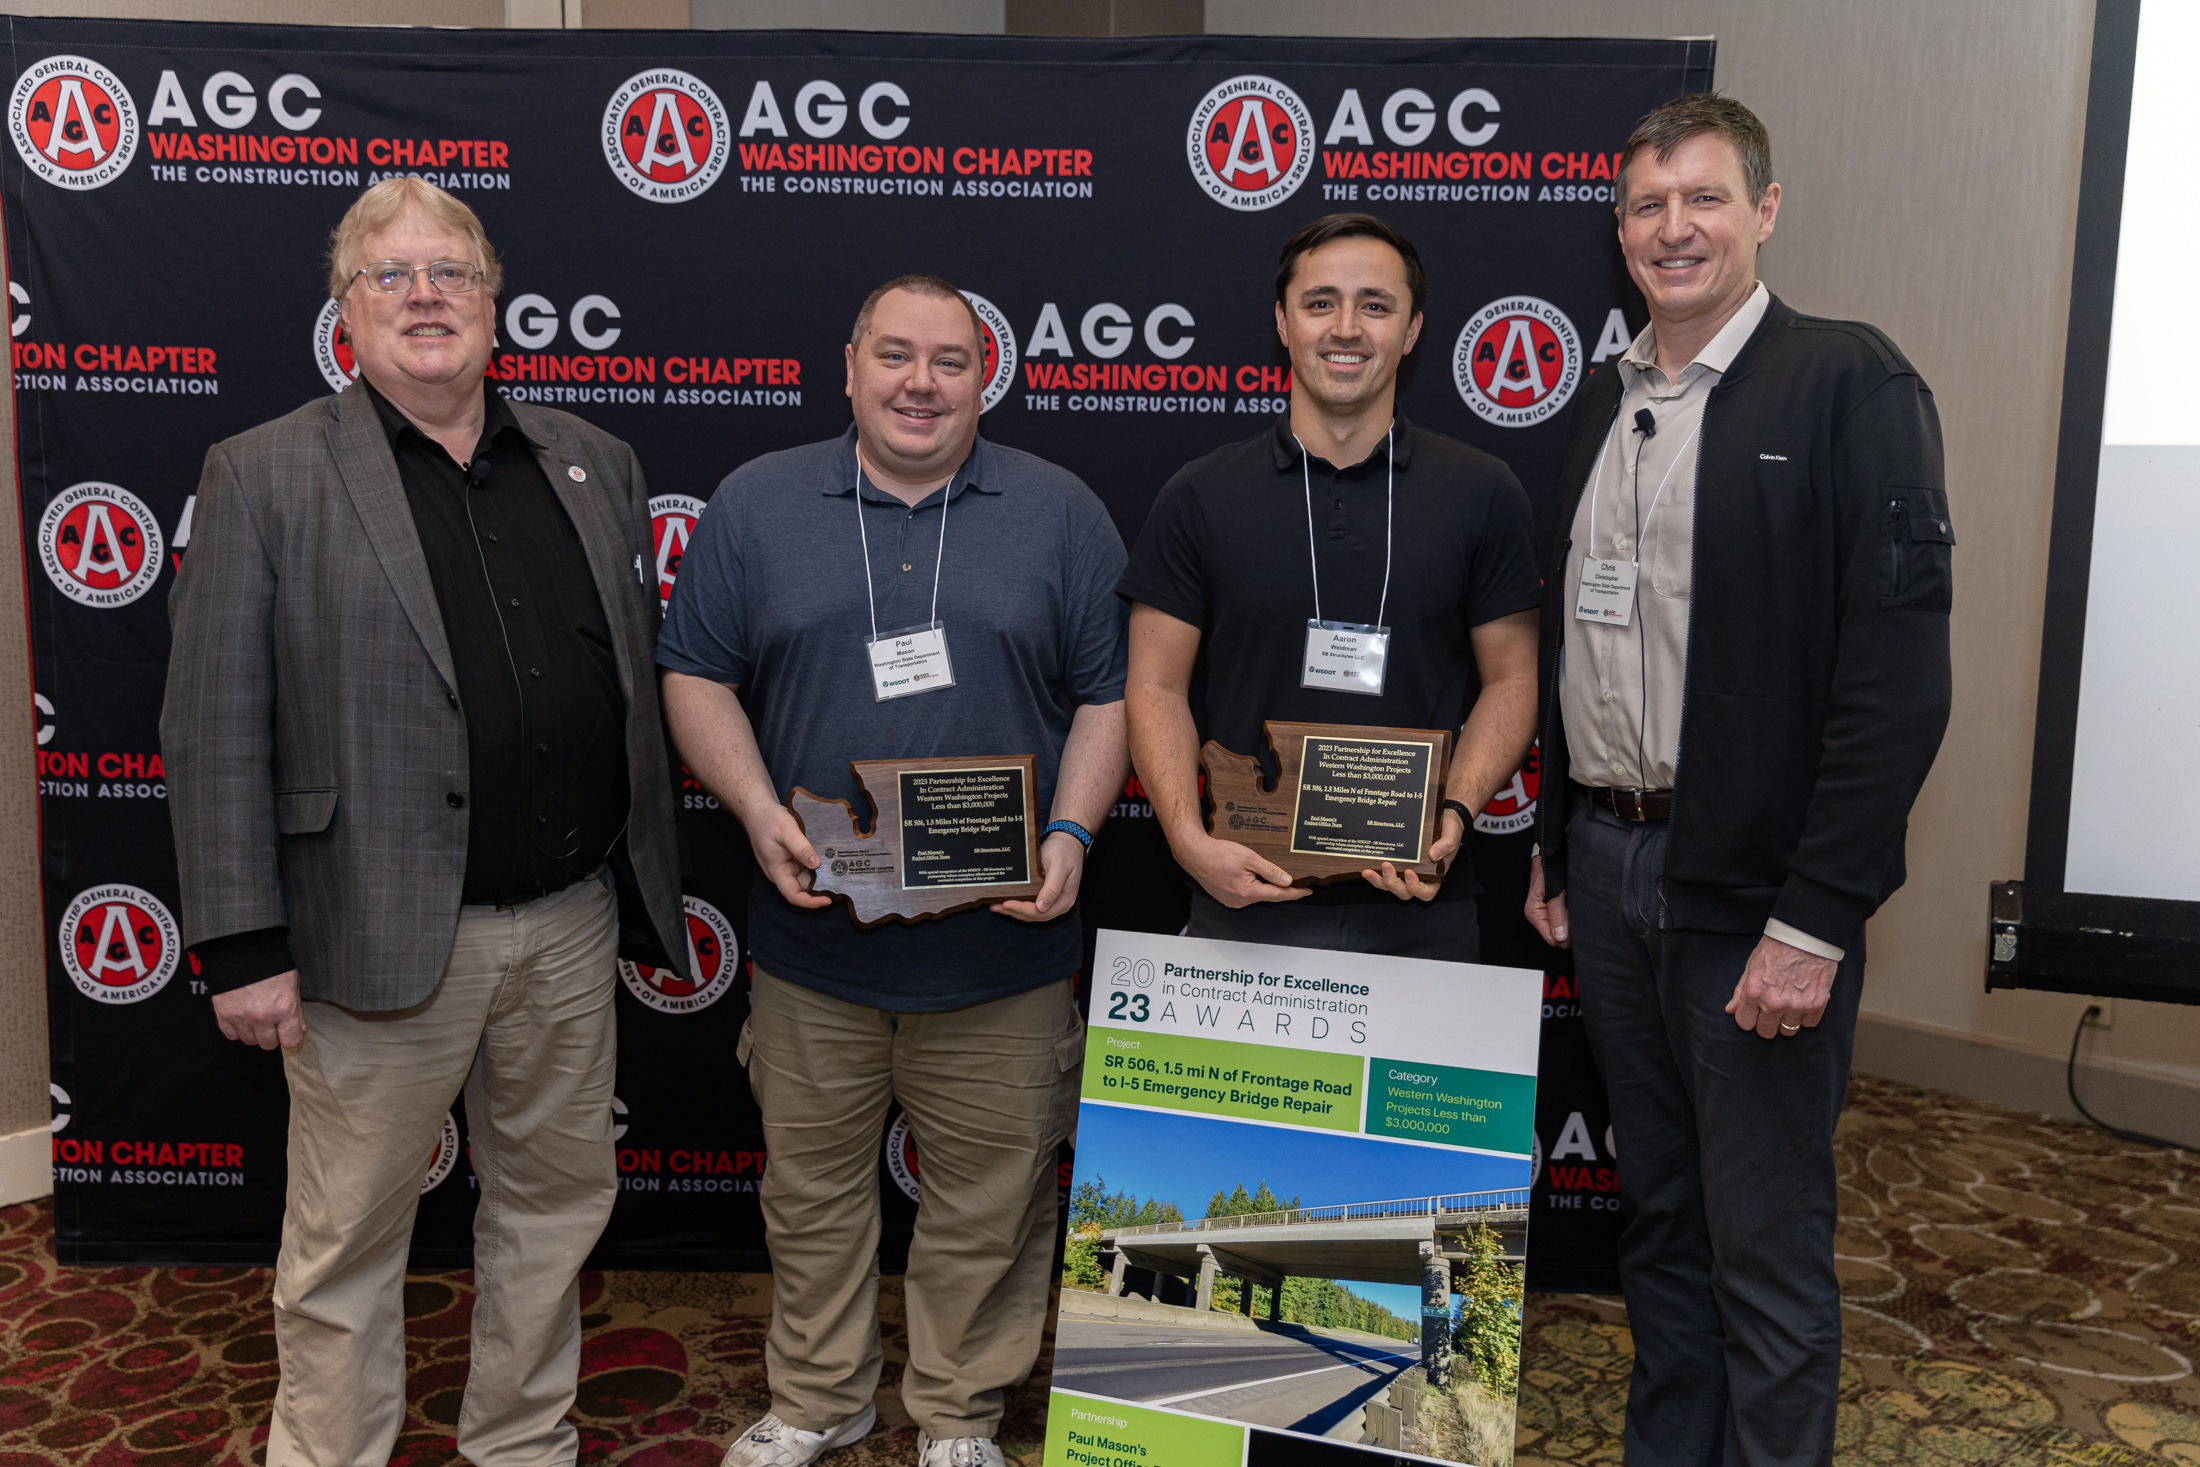 Four people, two of whom are holding award plaques, standing in front of an AGC Washington Chapter backdrop.